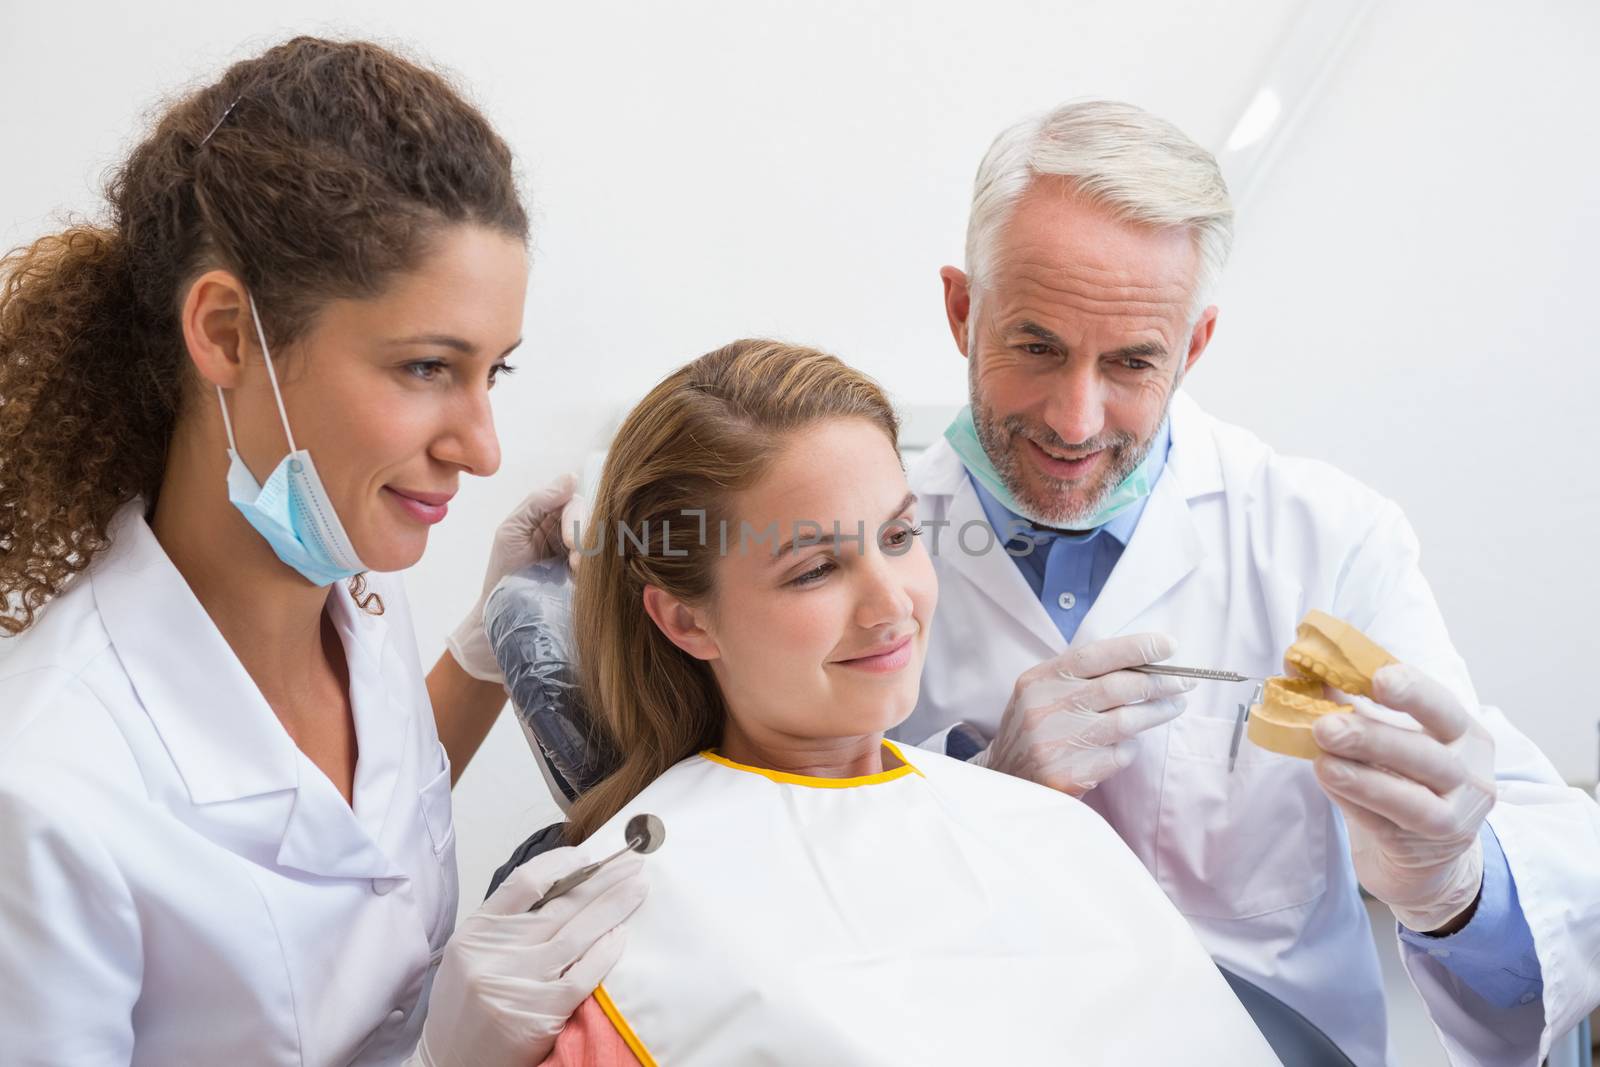 Dentist examining a patients teeth in the dentists chair with assistant at the dental clinic